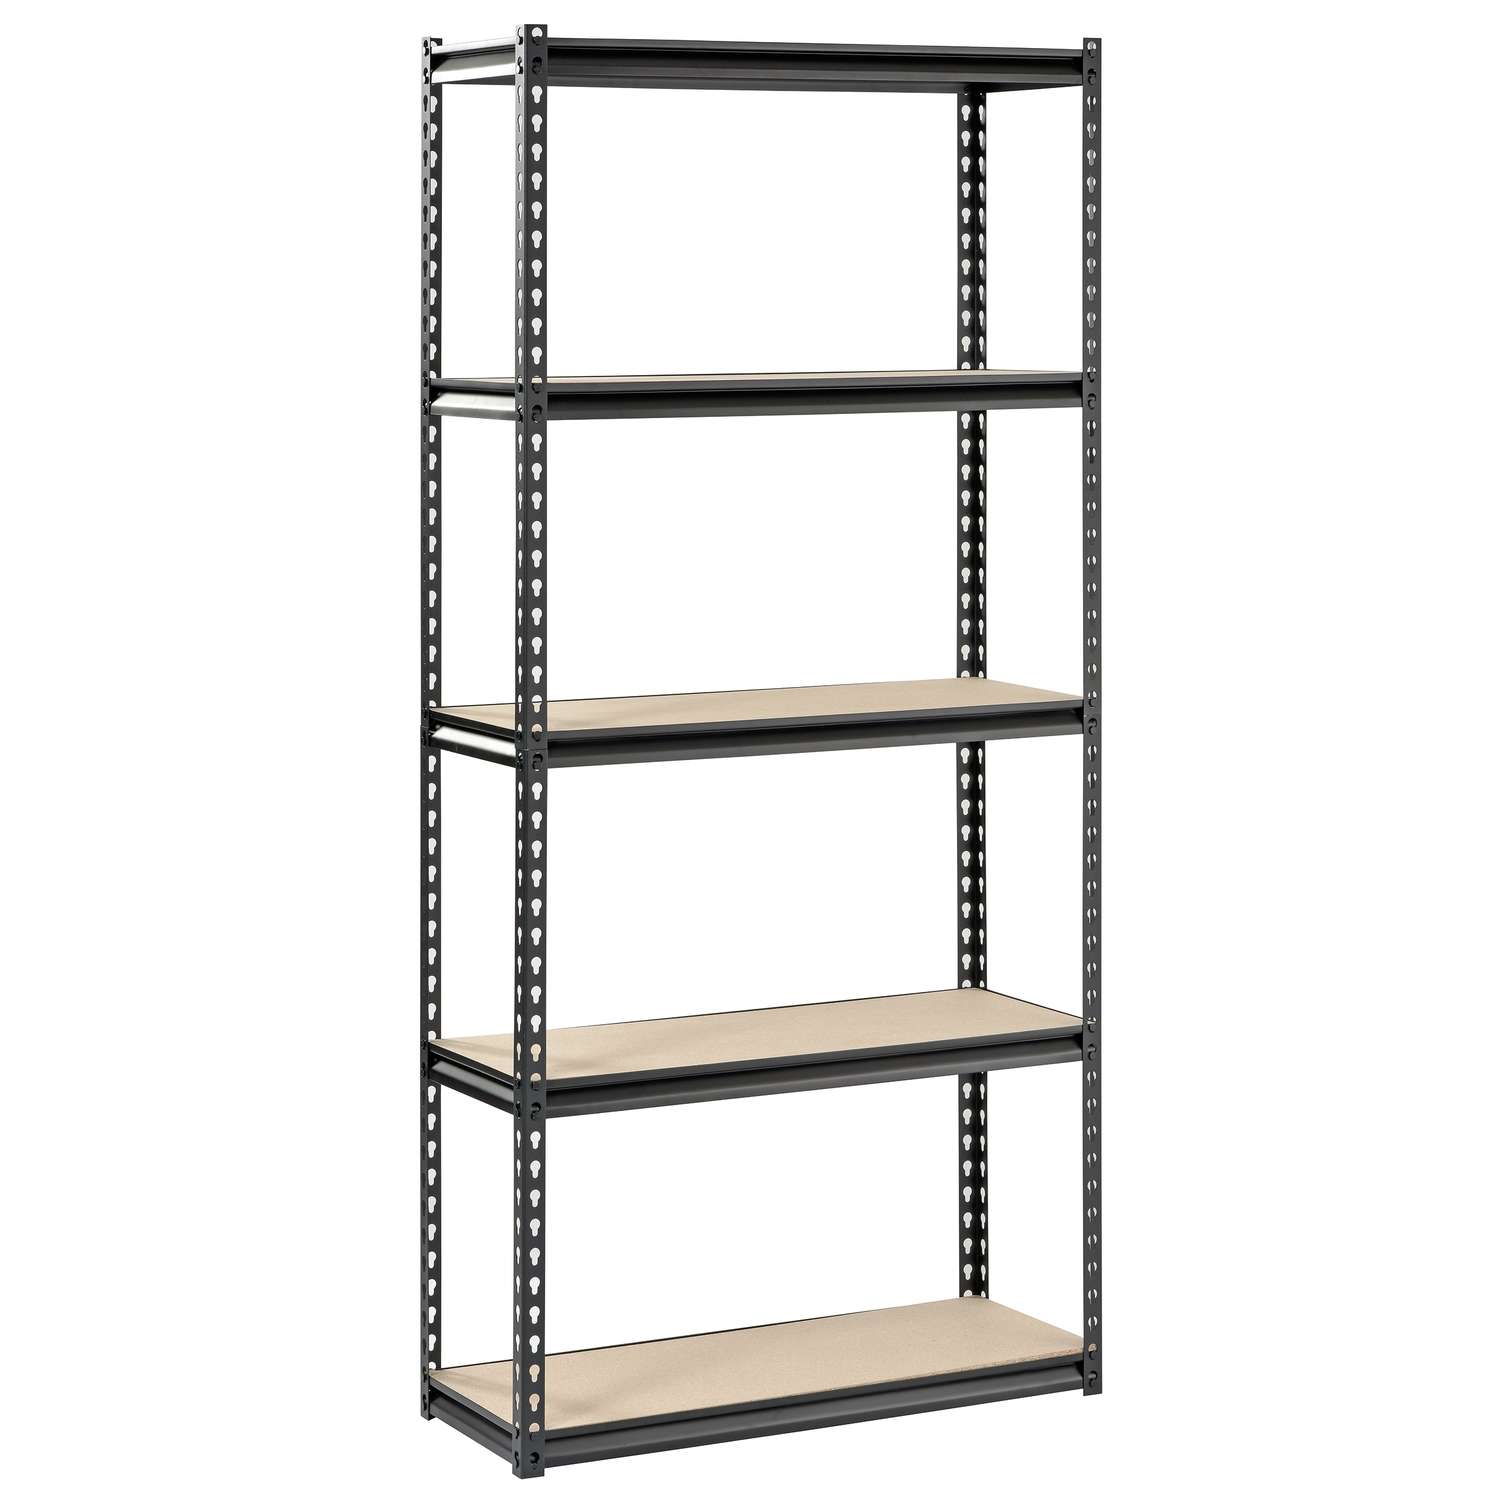 Edsal Muscle Rack 72 In H X 34 W, Ace Hardware Wooden Shelves